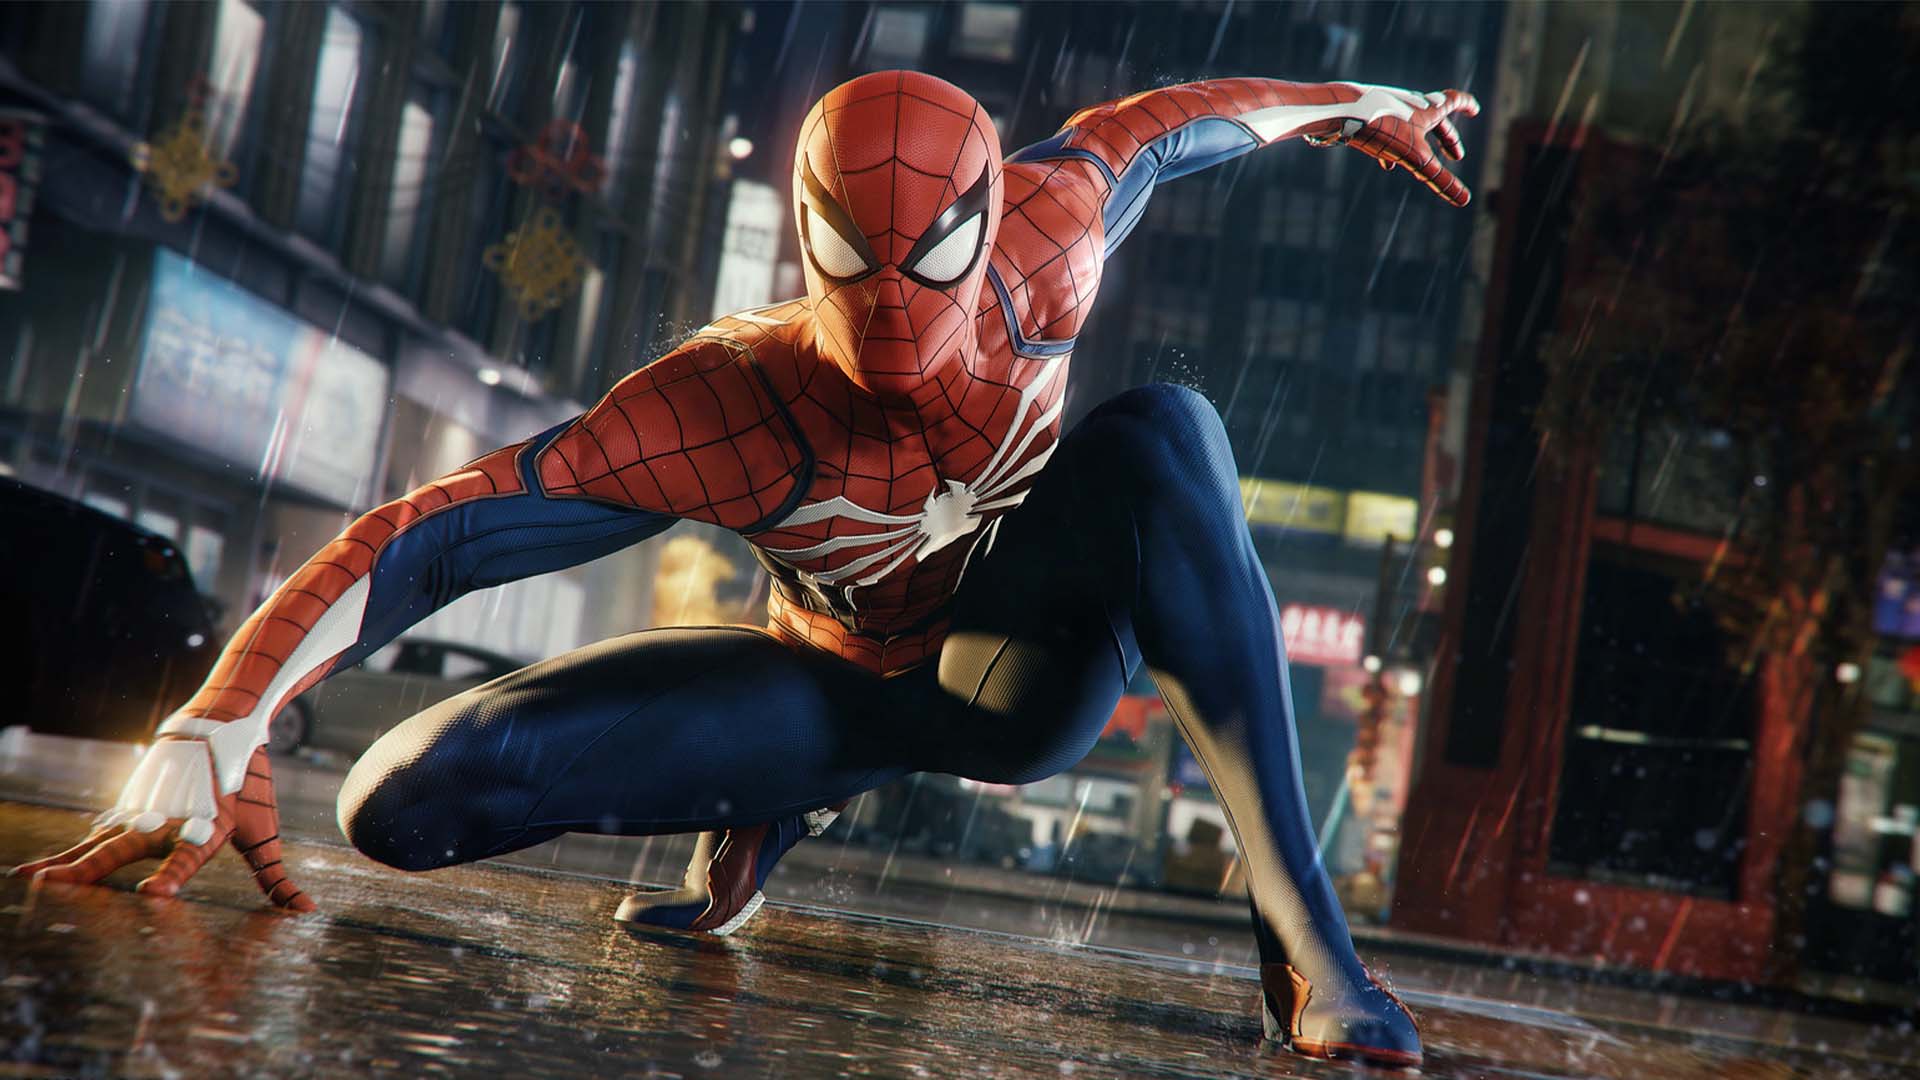 The Amazing Spider-Man 2 Review – PC/Steam – Game Chronicles